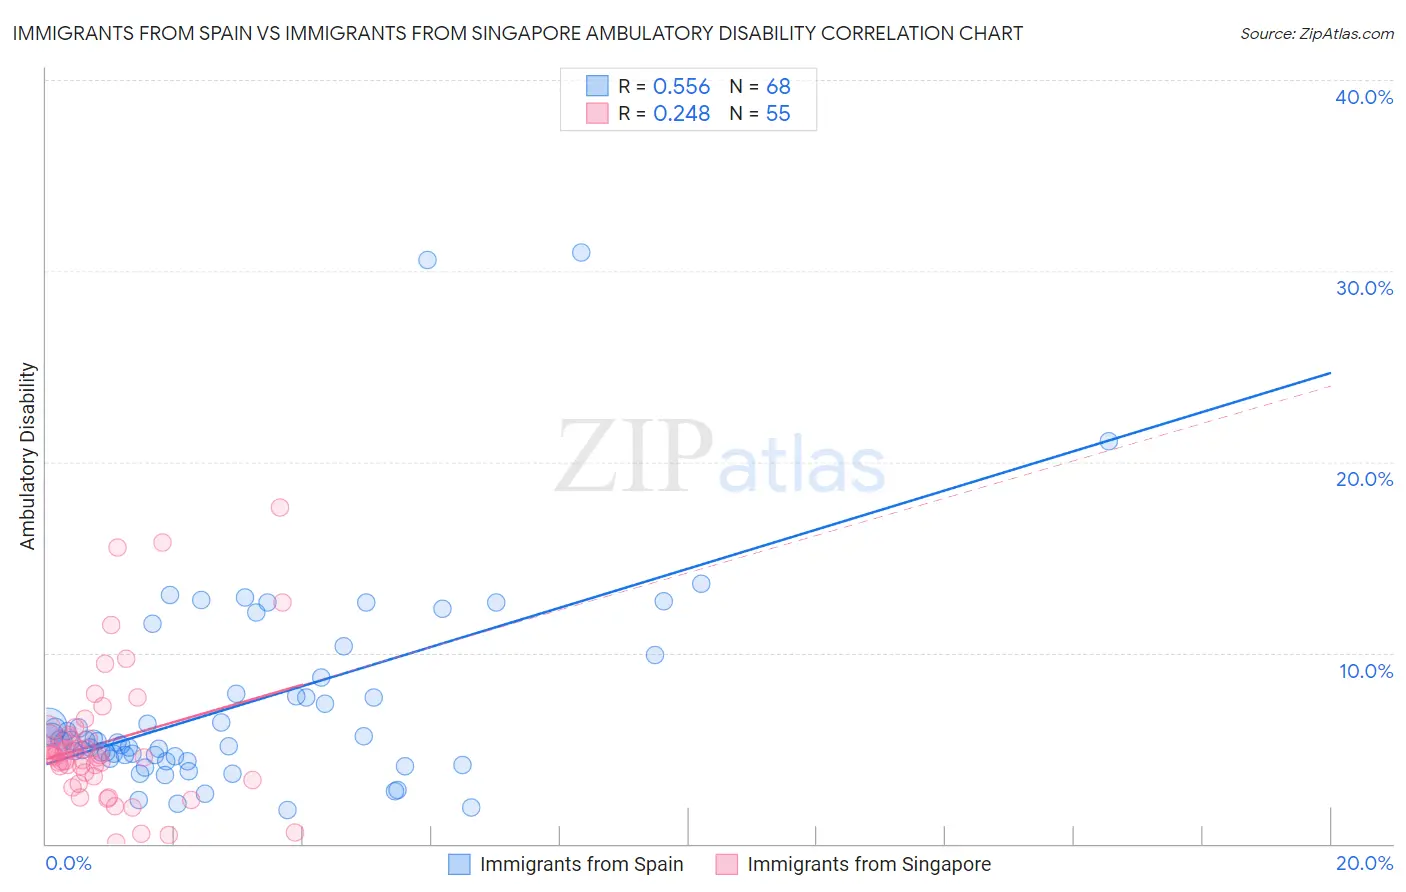 Immigrants from Spain vs Immigrants from Singapore Ambulatory Disability